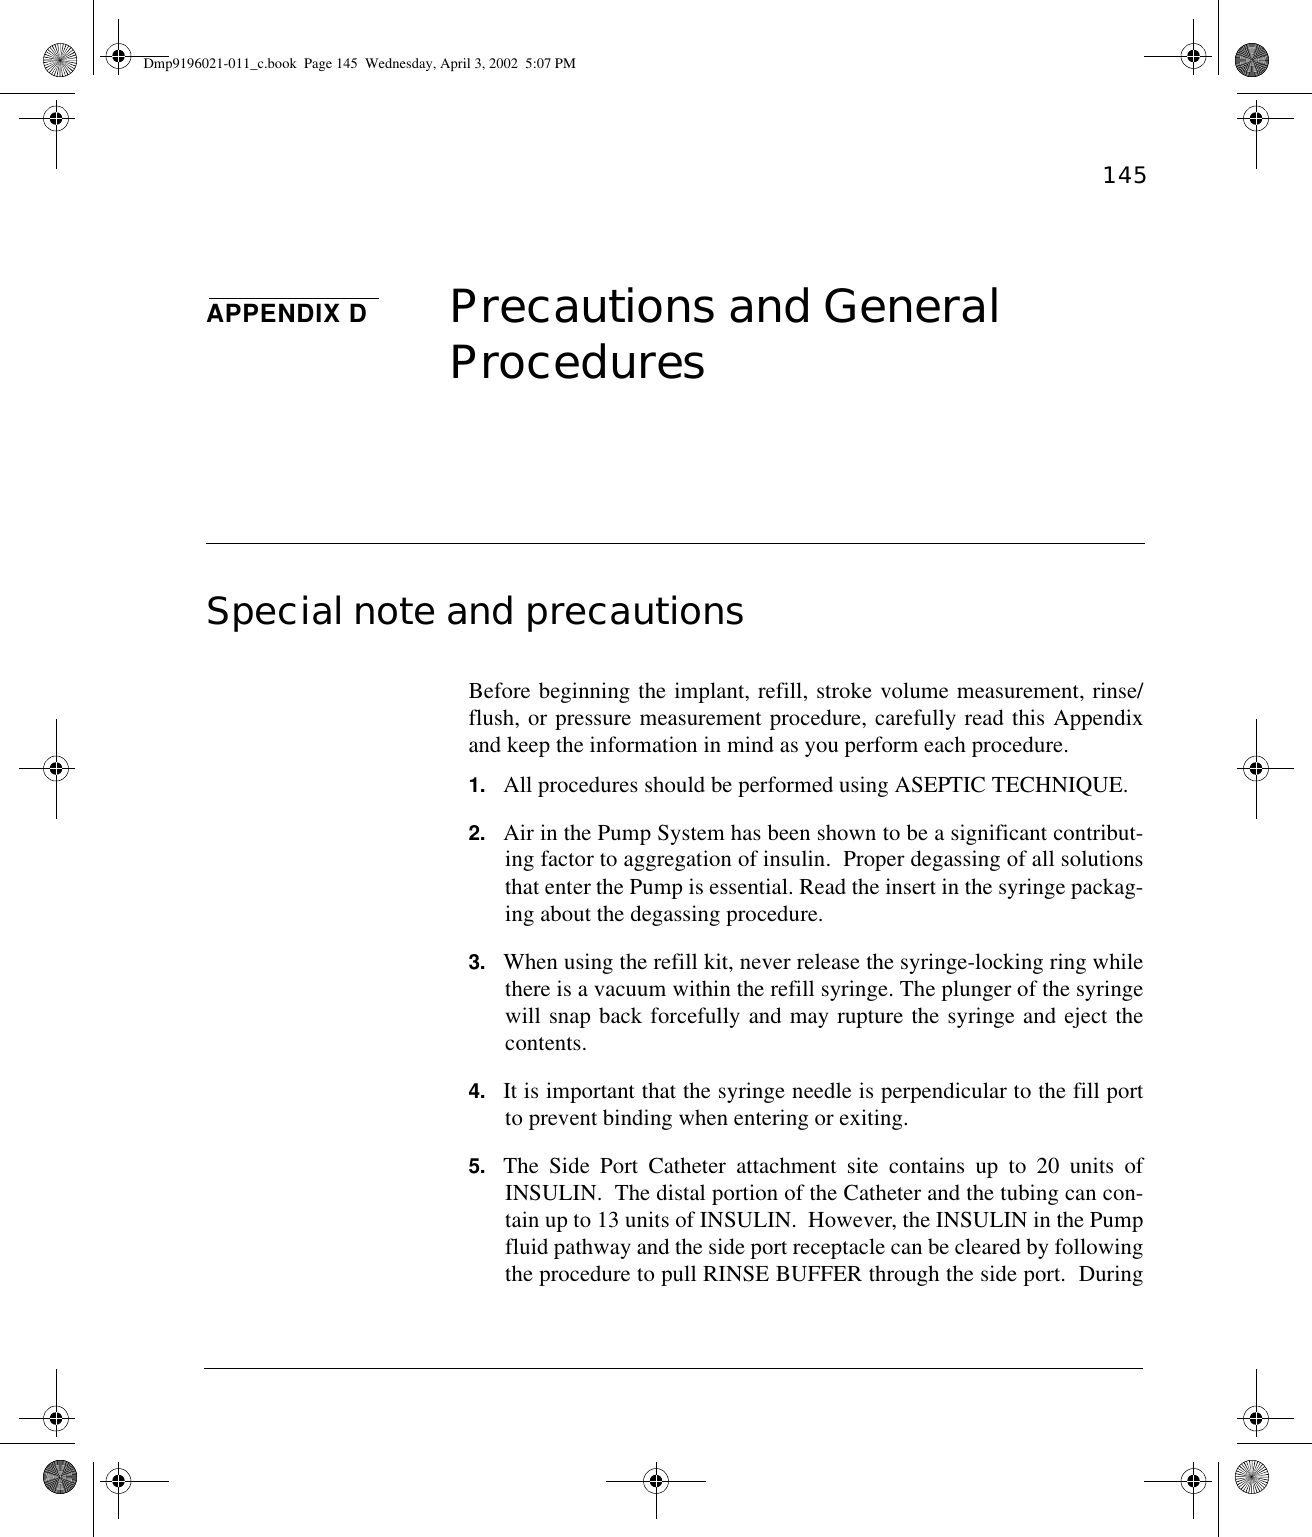 145APPENDIX D Precautions and General Procedures Special note and precautions Before beginning the implant, refill, stroke volume measurement, rinse/flush, or pressure measurement procedure, carefully read this Appendixand keep the information in mind as you perform each procedure.1. All procedures should be performed using ASEPTIC TECHNIQUE.2. Air in the Pump System has been shown to be a significant contribut-ing factor to aggregation of insulin.  Proper degassing of all solutionsthat enter the Pump is essential. Read the insert in the syringe packag-ing about the degassing procedure.3. When using the refill kit, never release the syringe-locking ring whilethere is a vacuum within the refill syringe. The plunger of the syringewill snap back forcefully and may rupture the syringe and eject thecontents.4. It is important that the syringe needle is perpendicular to the fill portto prevent binding when entering or exiting.5. The Side Port Catheter attachment site contains up to 20 units ofINSULIN.  The distal portion of the Catheter and the tubing can con-tain up to 13 units of INSULIN.  However, the INSULIN in the Pumpfluid pathway and the side port receptacle can be cleared by followingthe procedure to pull RINSE BUFFER through the side port.  DuringDmp9196021-011_c.book  Page 145  Wednesday, April 3, 2002  5:07 PM